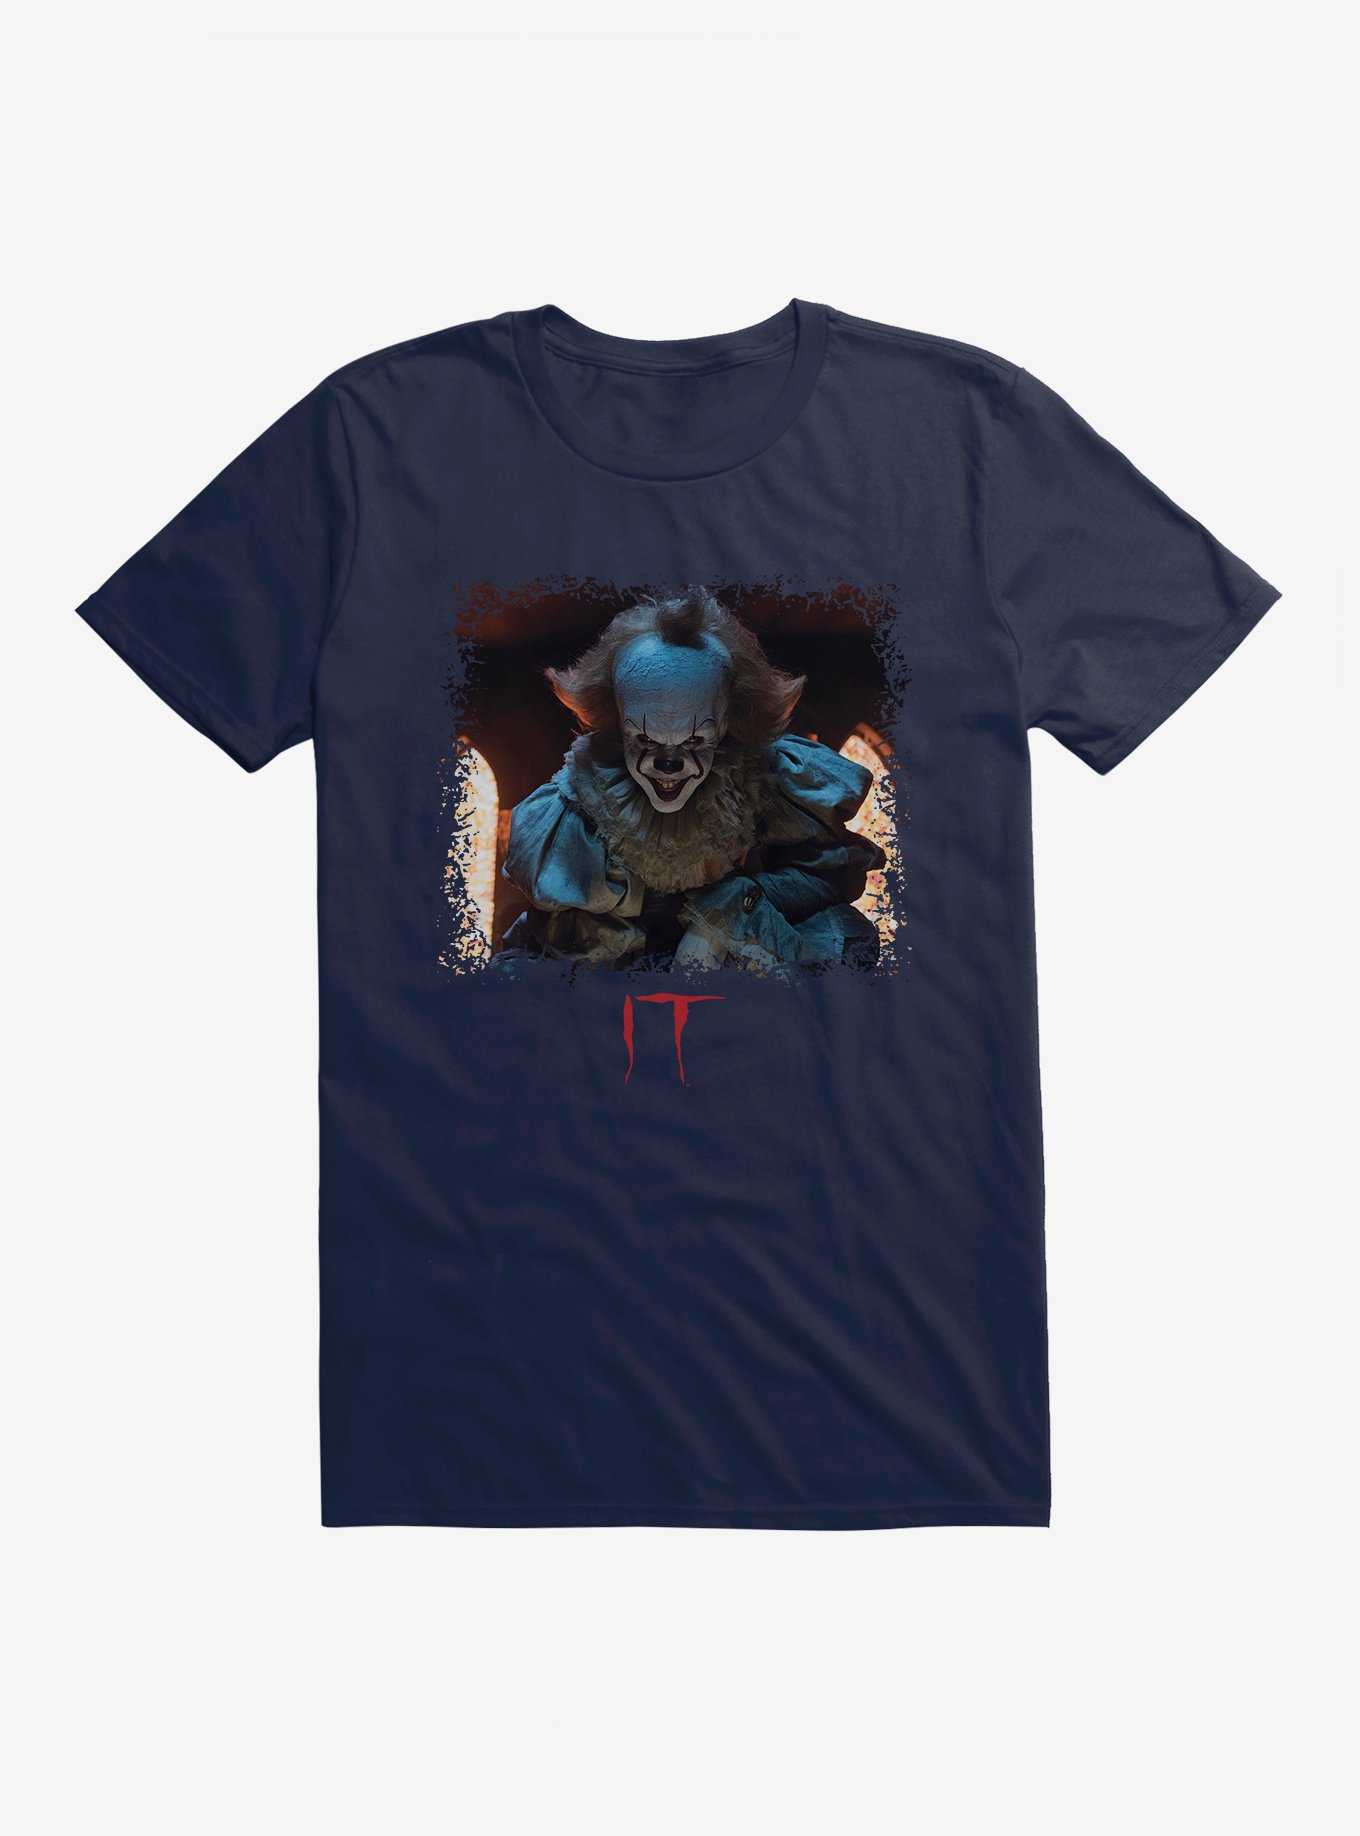 IT Pennywise Mischievous Smile T-Shirt, MIDNIGHT NAVY, hi-res